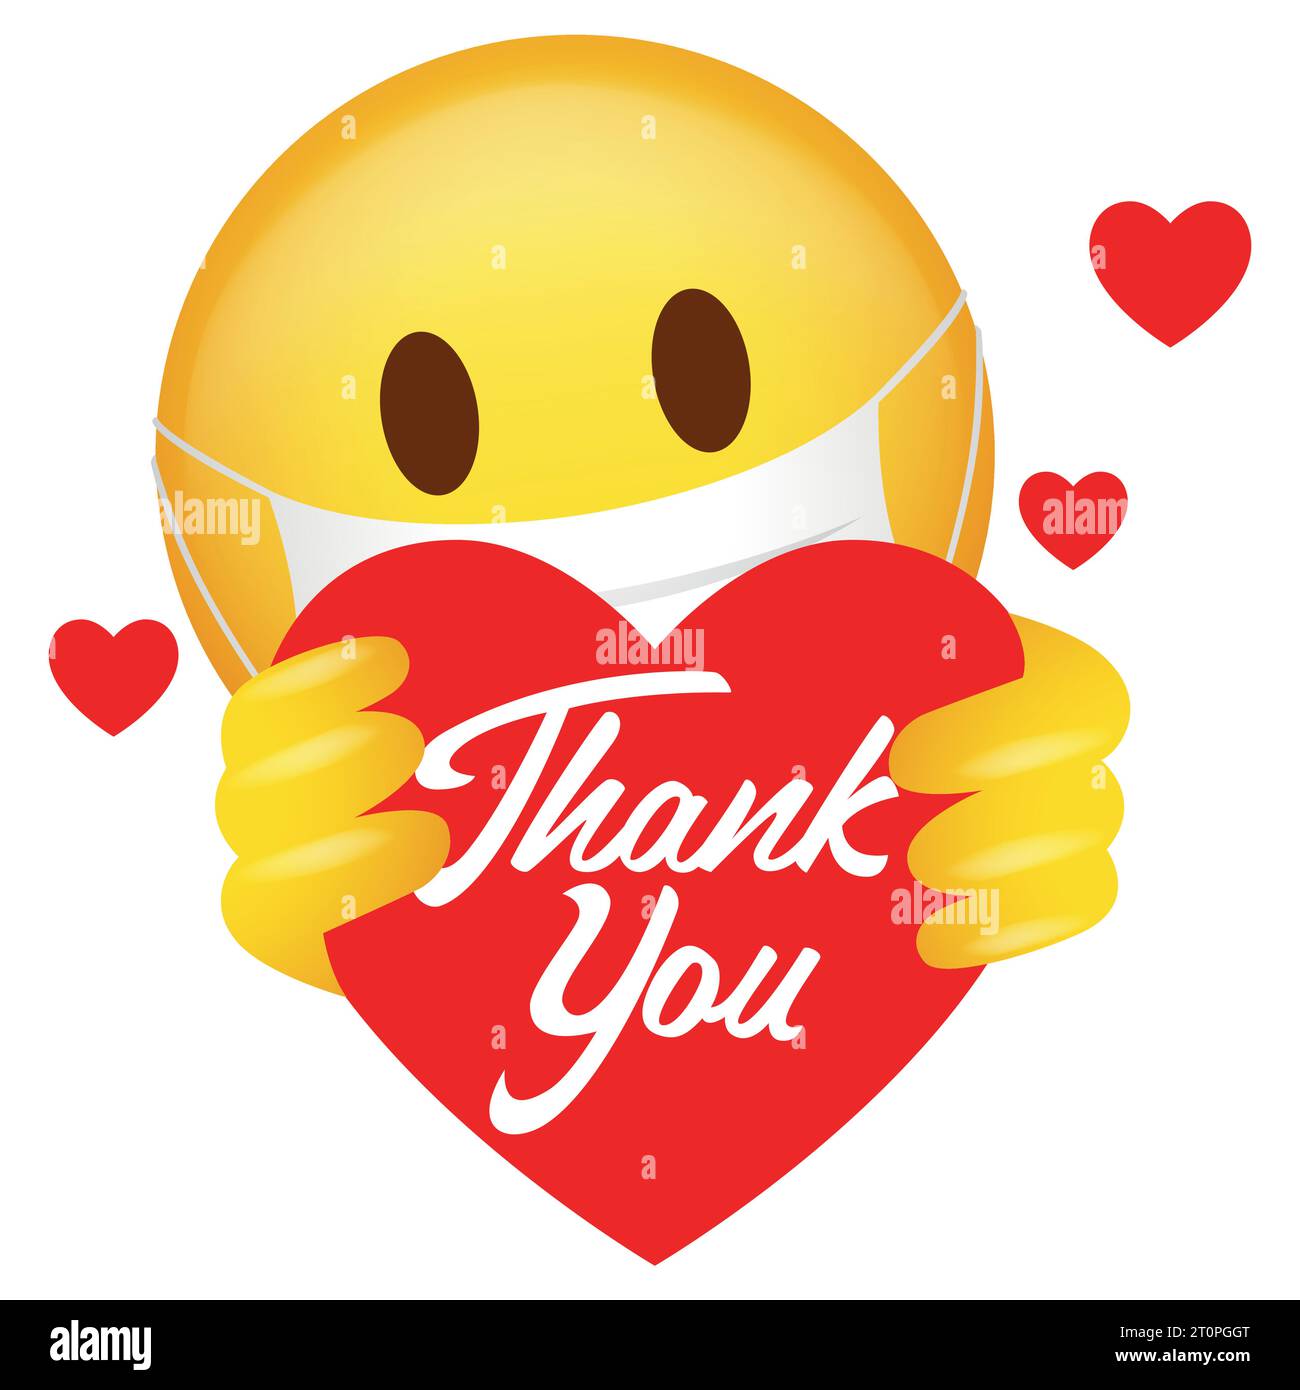 Vector illustration of emoticon wearing medical mask holding heart symbol with Thank You message Stock Vector